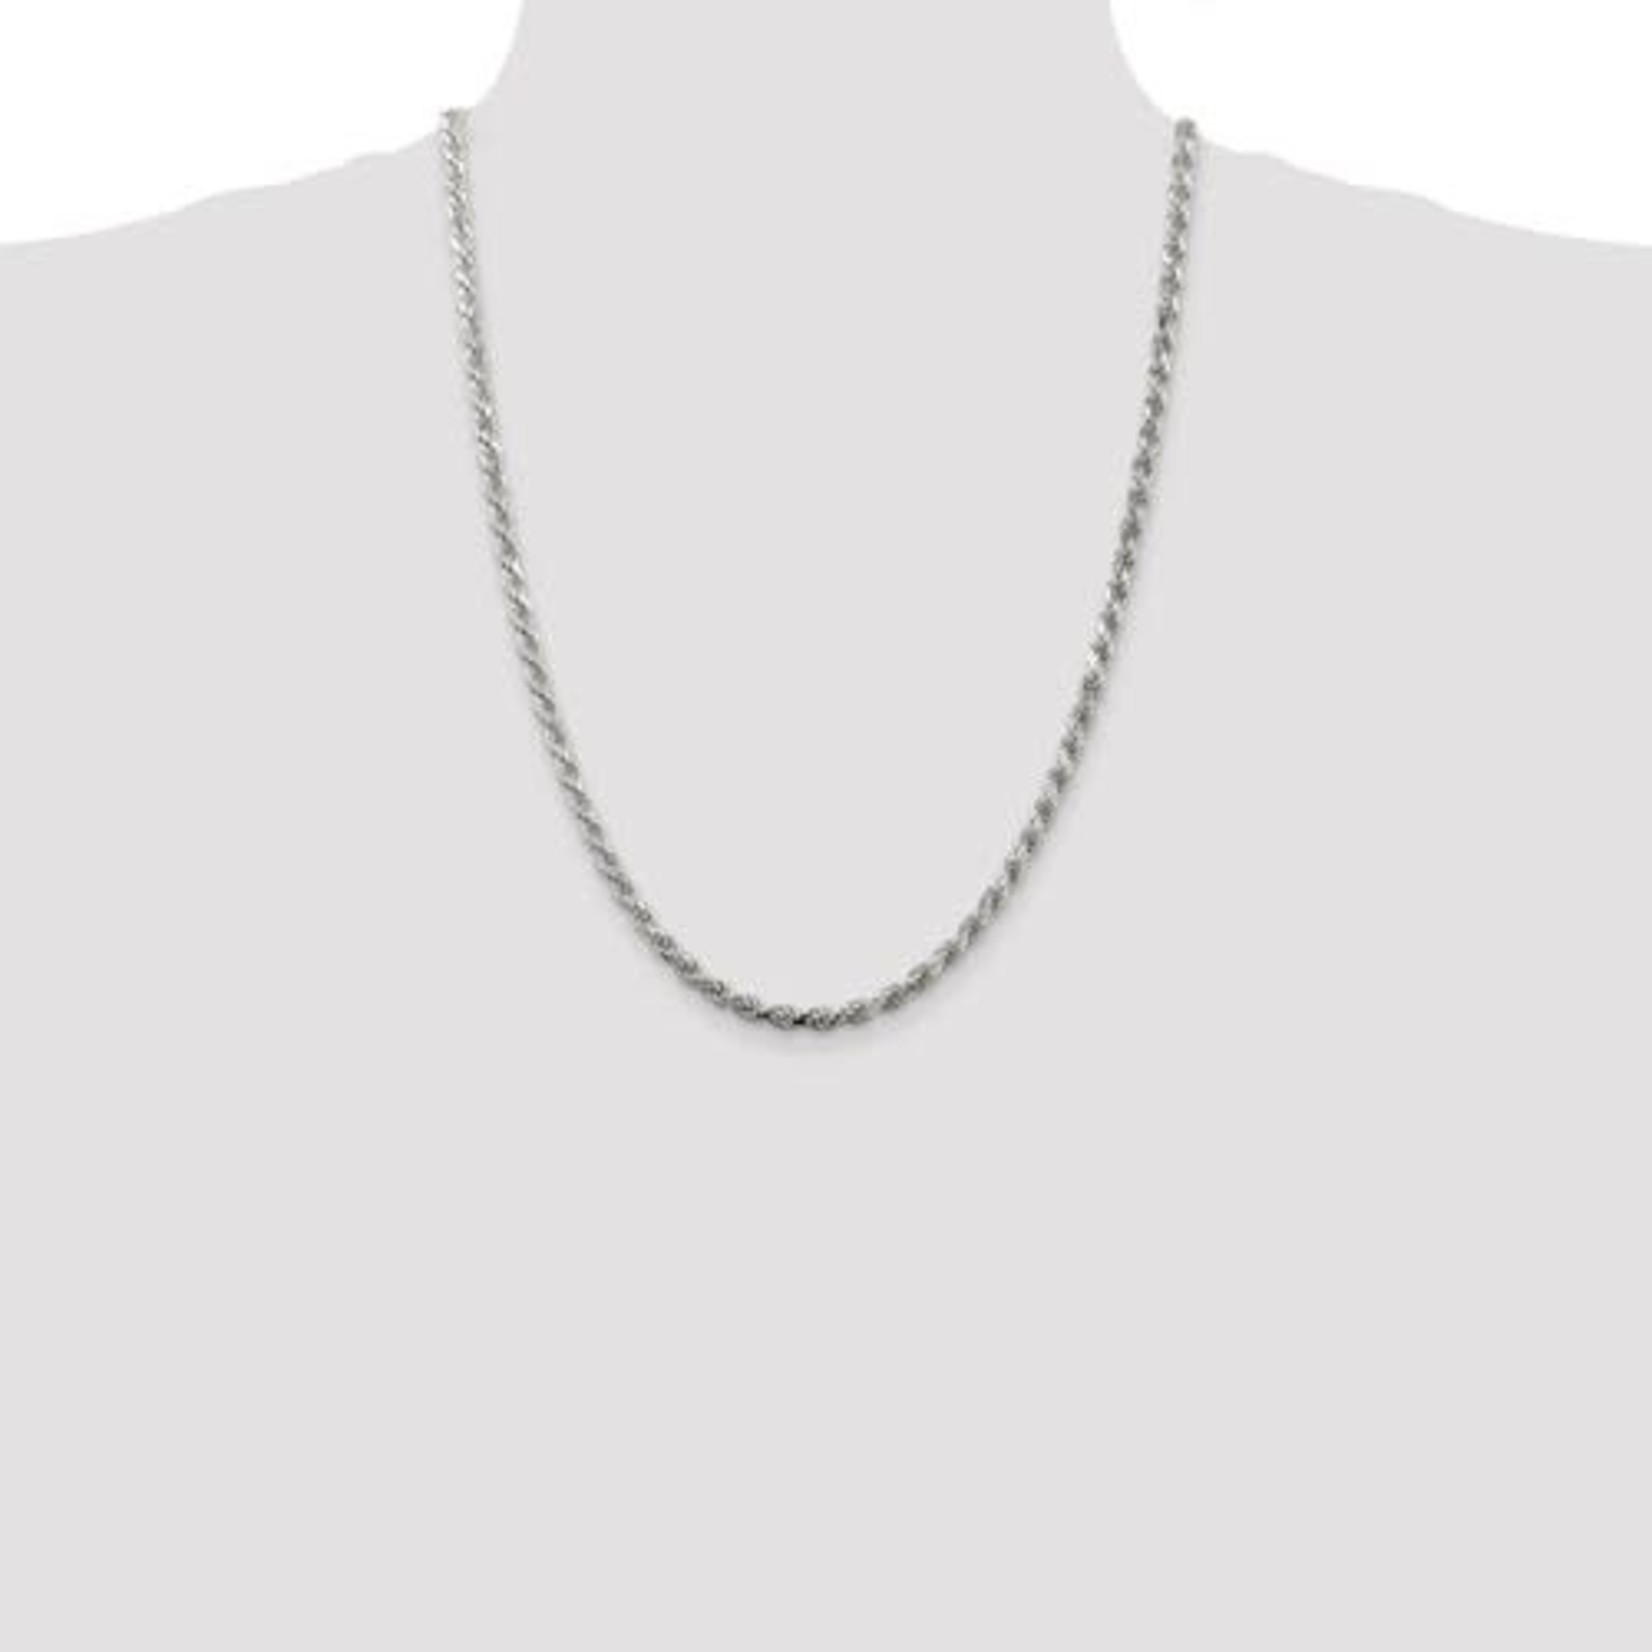 This Is Life Diamond Cut Rope Chain - Sterling Silver 4.25mm